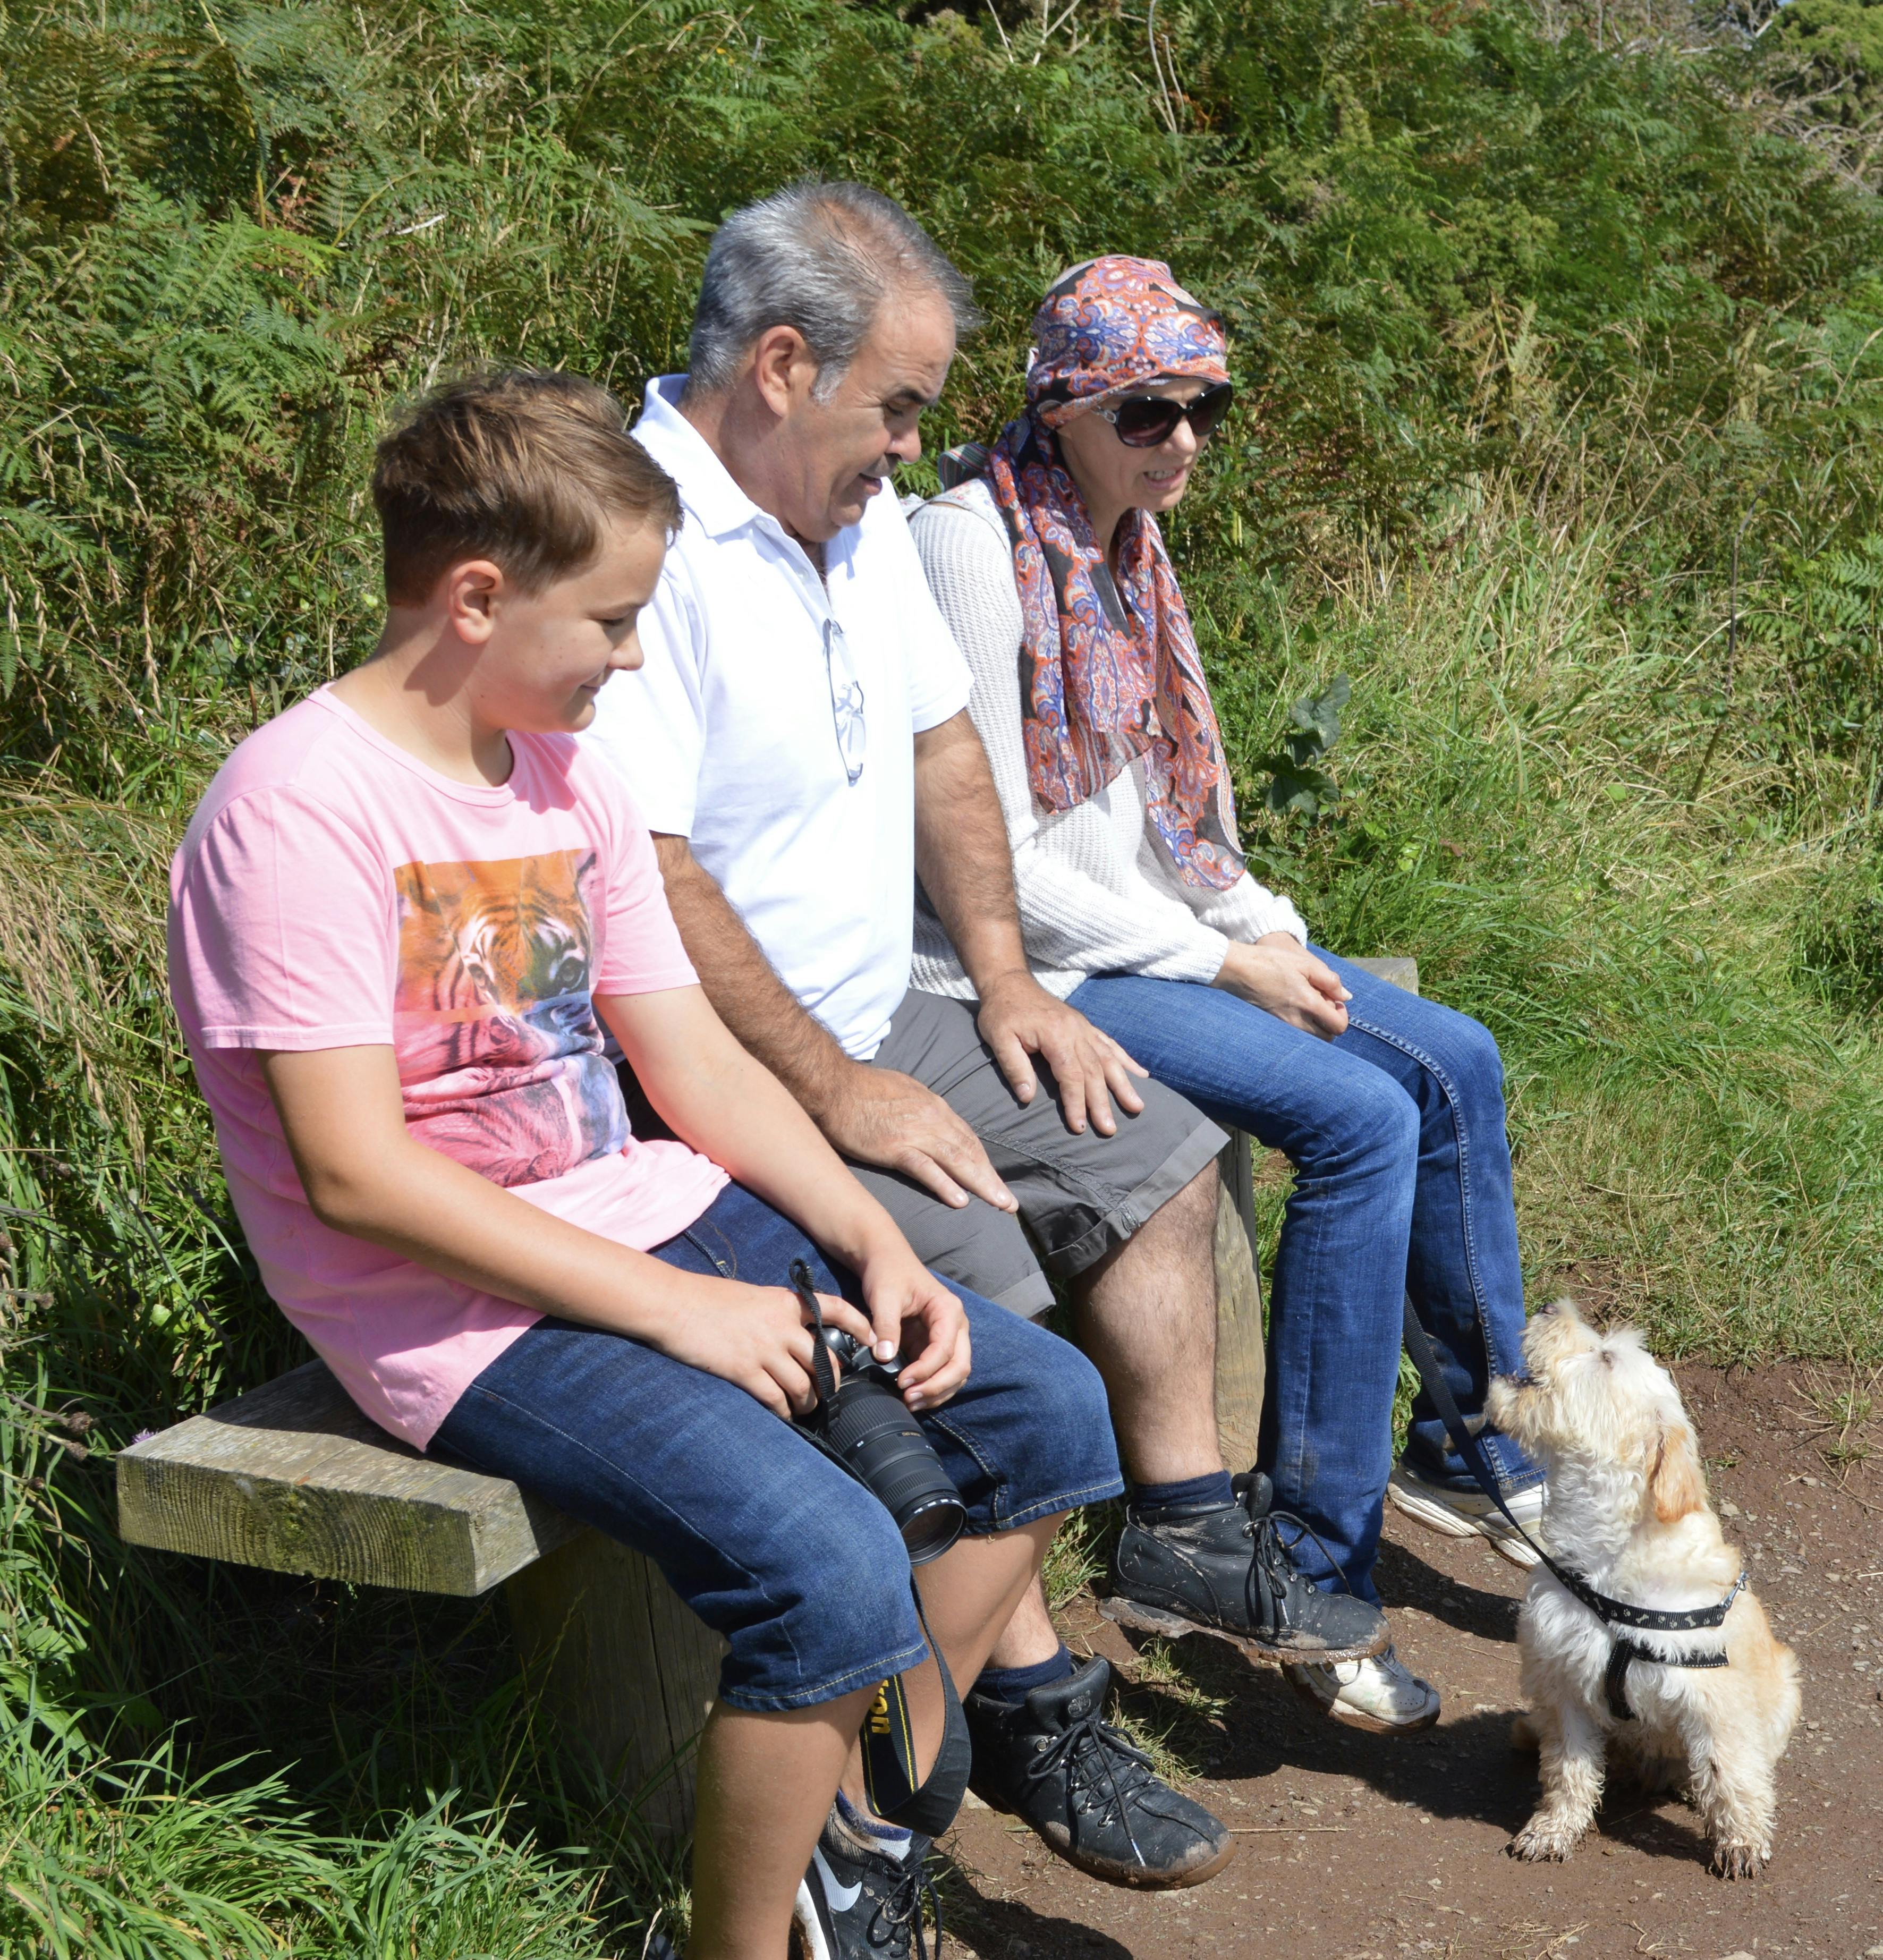 The family at Hythe with Bertie the dog